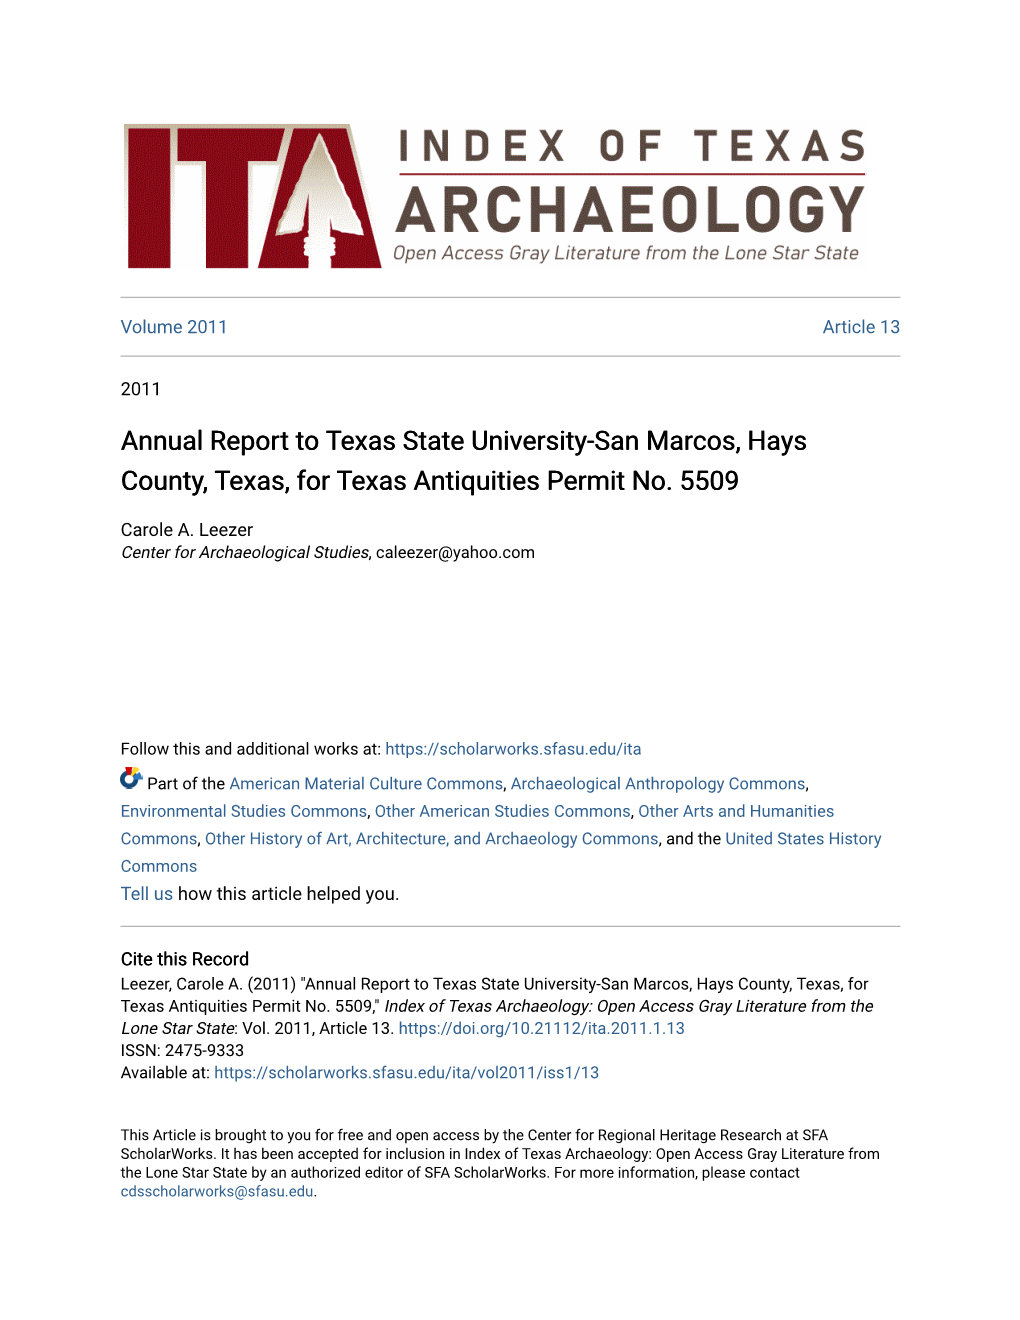 Annual Report to Texas State University-San Marcos, Hays County, Texas, for Texas Antiquities Permit No